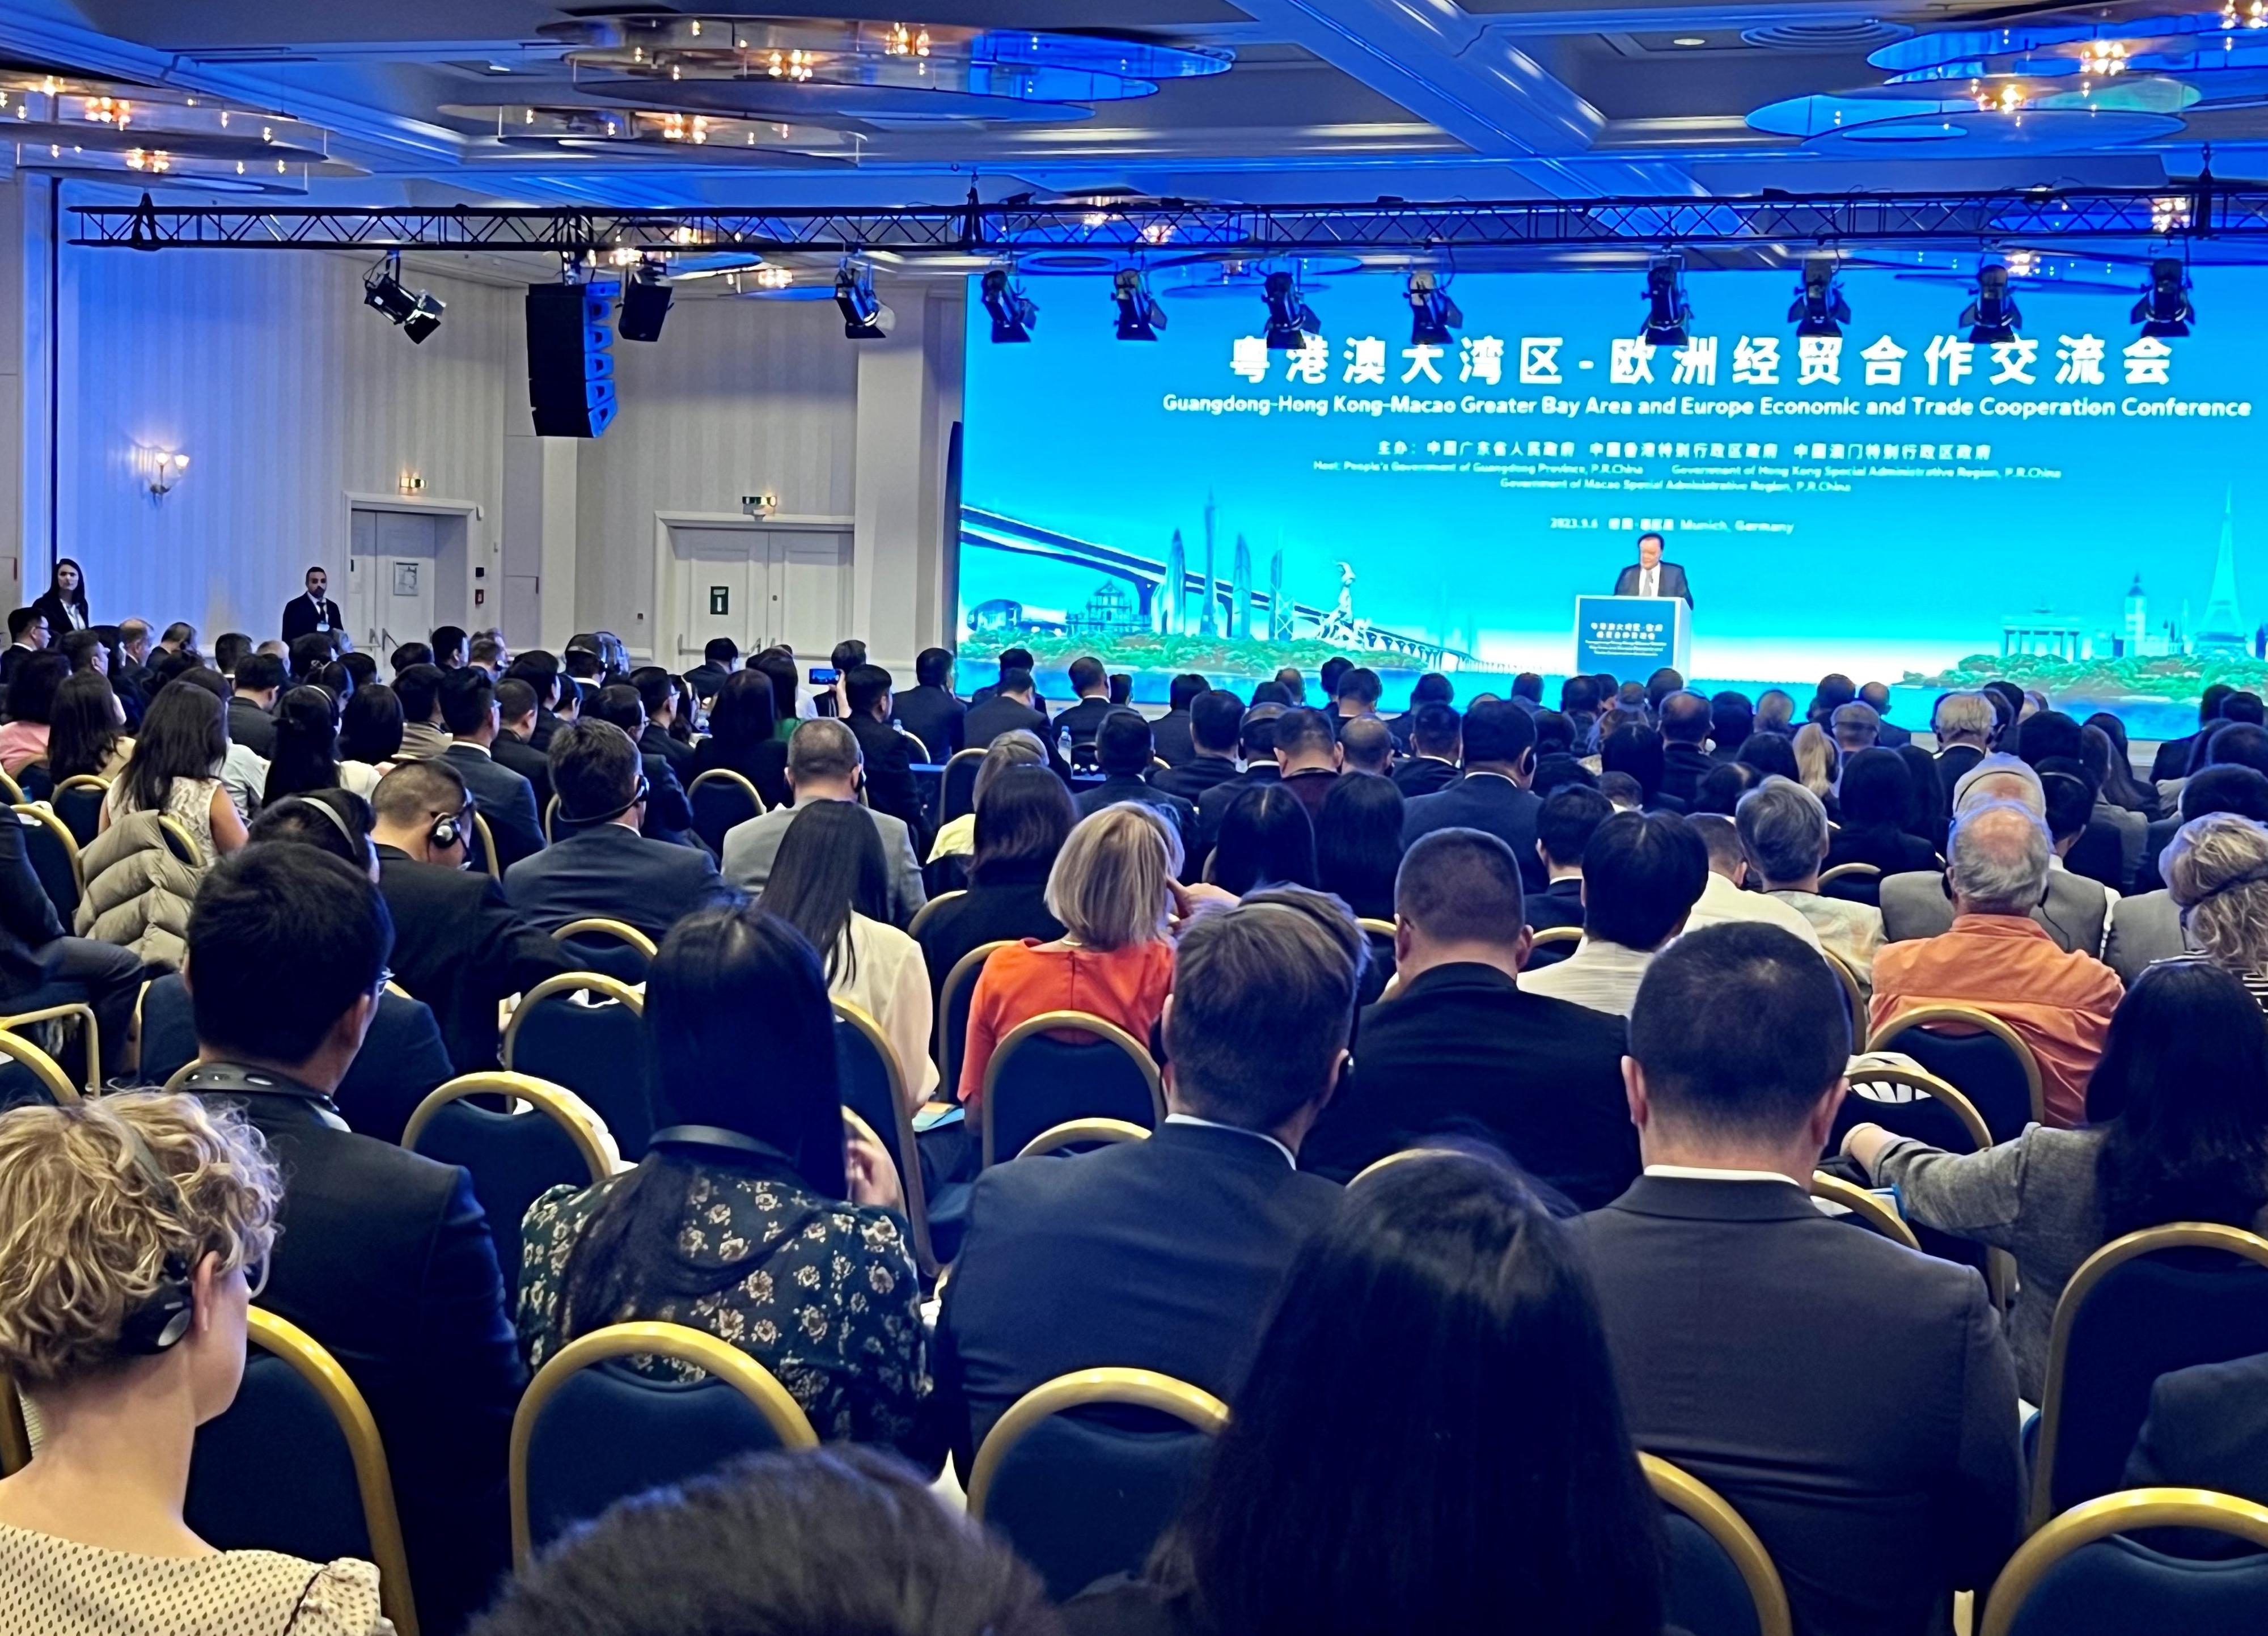 The Secretary for Commerce and Economic Development, Mr Algernon Yau, attended the Guangdong-Hong Kong-Macao Greater Bay Area and Europe Economic and Trade Cooperation Conference in Munich, Germany, on September 6 (Munich time). The conference, comprising a themed forum and a business matchmaking session, attracted more than 400 participants.